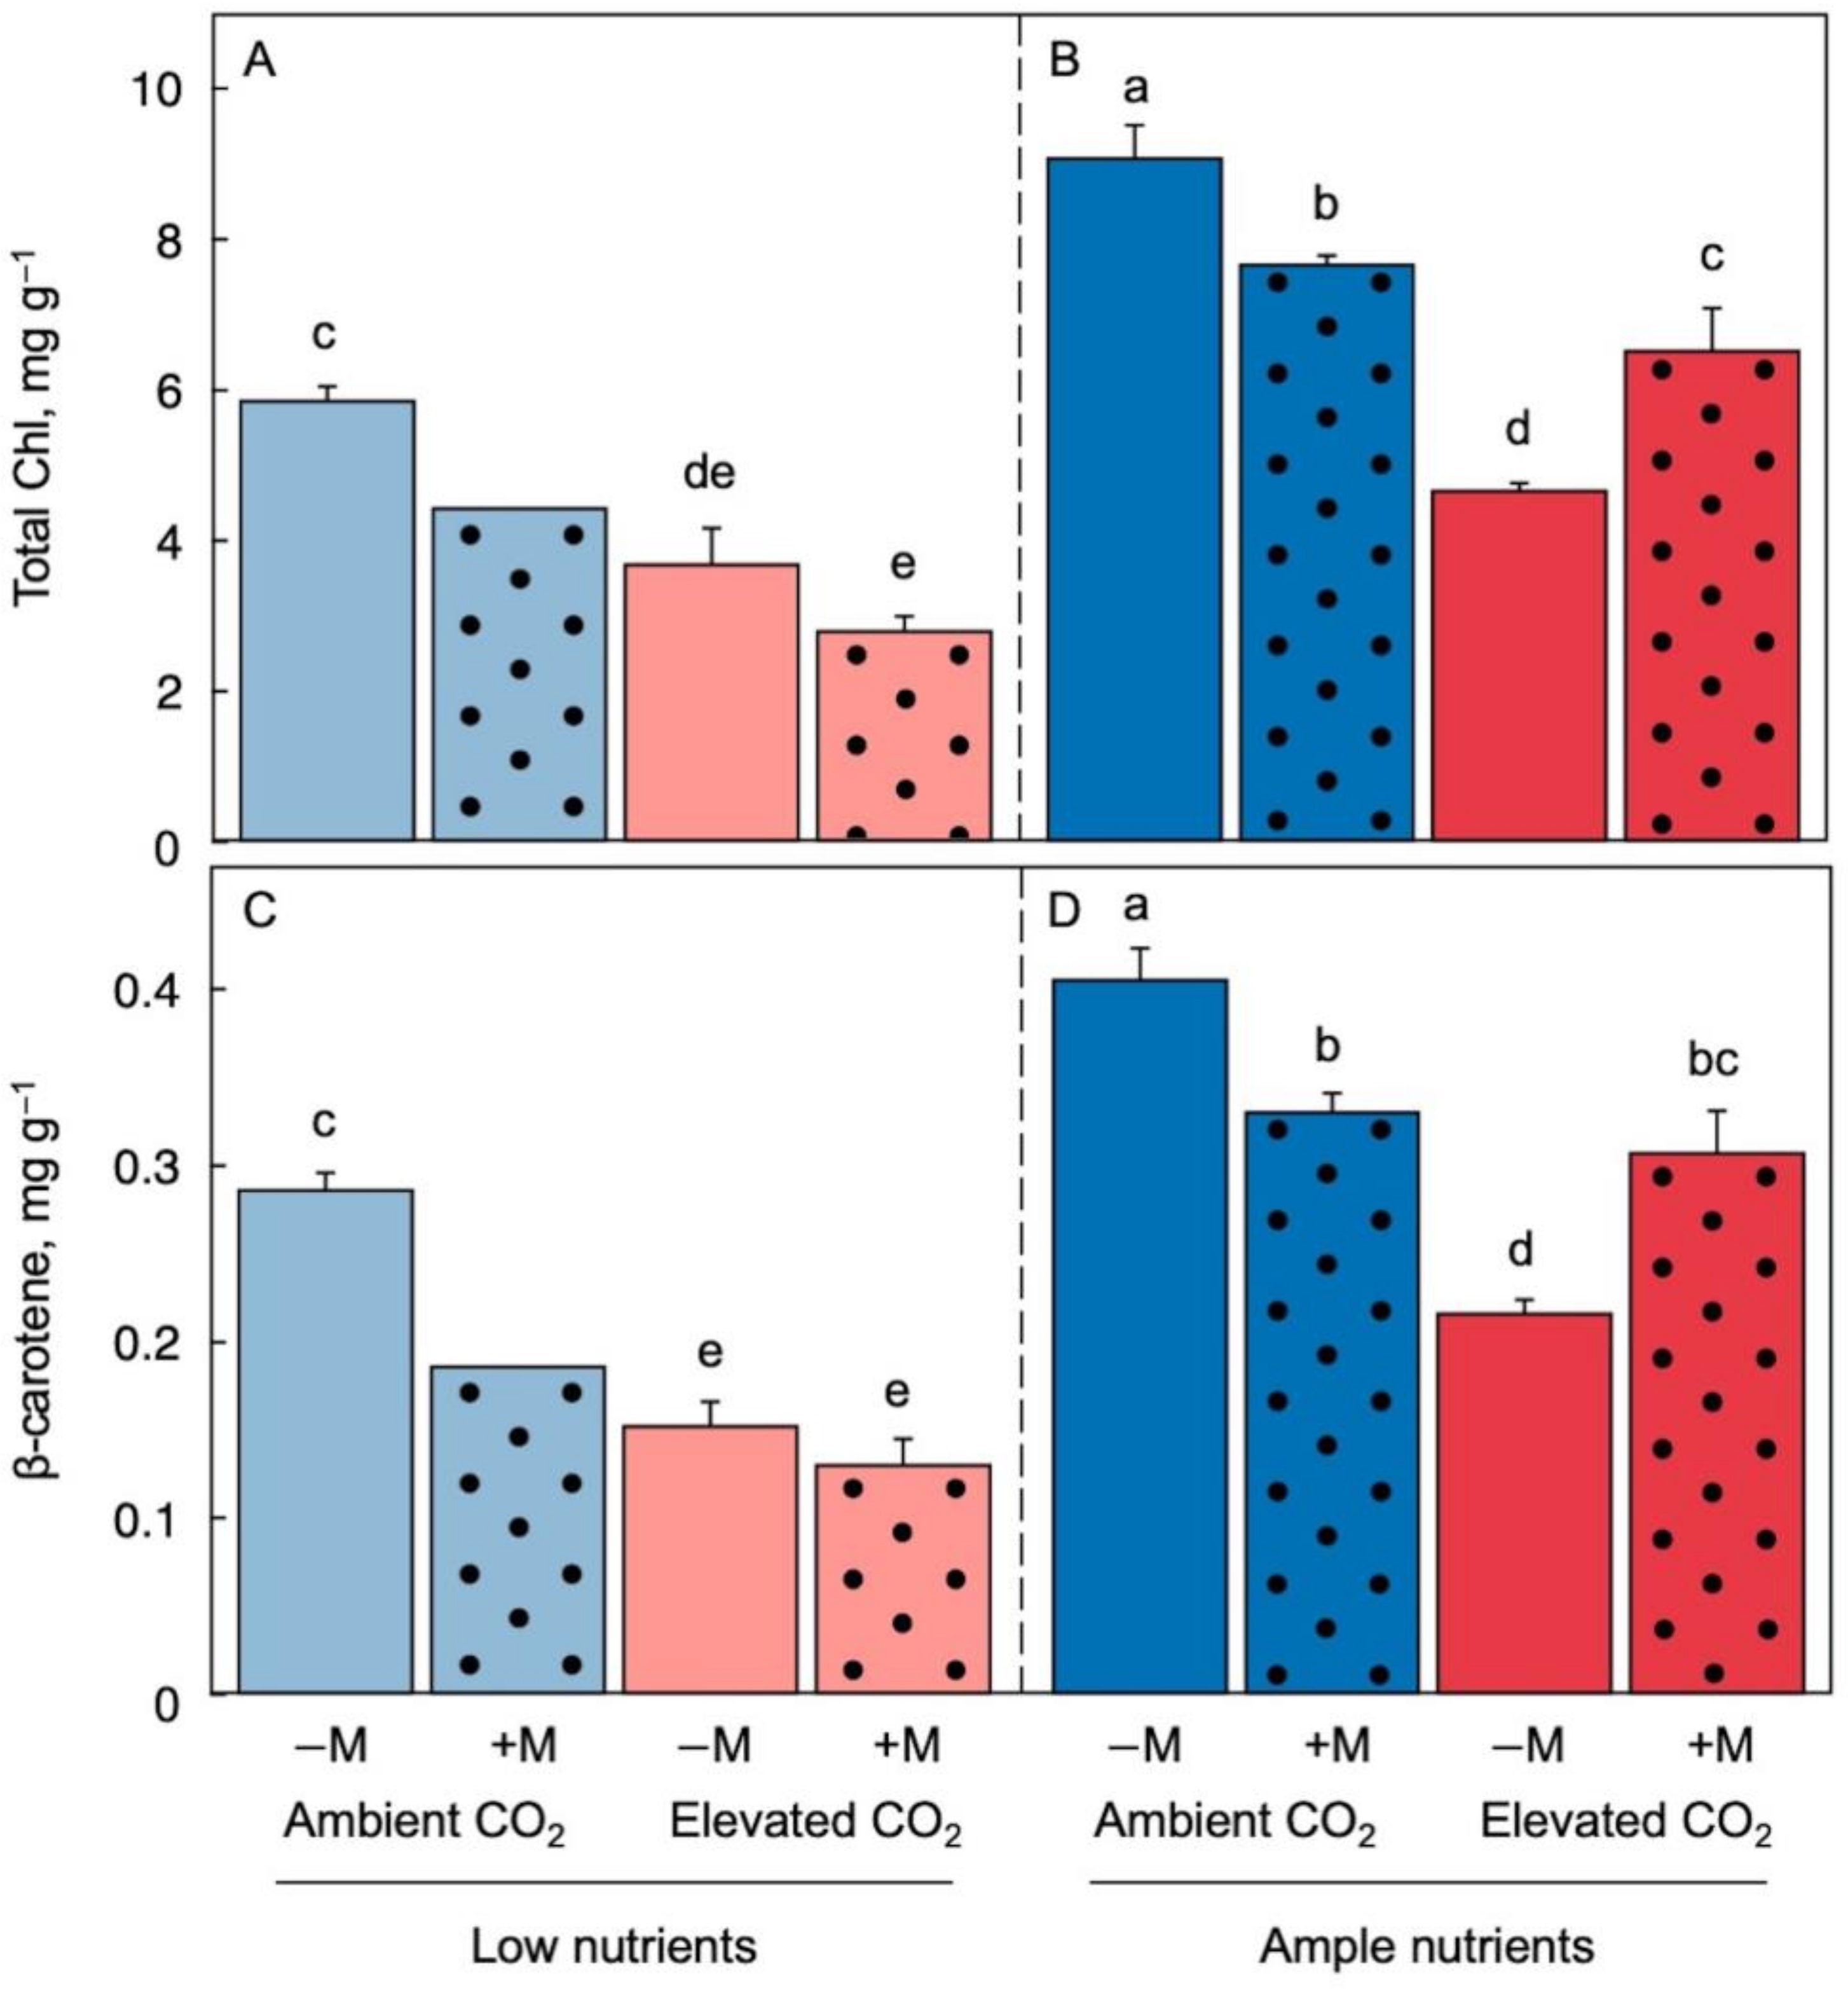 Figure 3. Chlorophyll (a + b) content (A,B) and β-carotene content (C,D) as fractions of dry biomass under low (A,C) and ample (B,D) nutrient supply for Lemna minor grown in 1/20 (light blue or light red) or 1/2 strength (dark blue or dark red) Schenk & Hildebrandt medium and either ambient (blue) or elevated (red) CO2 levels. Solid columns represent plants that were not inoculated (−M) and dotted columns represent plants that were inoculated (+M) with microorganisms from a pond with L. minor. Mean values ± standard deviations; n = 3 under all conditions except for n = 2 in the treatment of inoculated fronds in ambient CO2 and low nutrients. Different lower-case letters represent significant differences at p < 0.05.